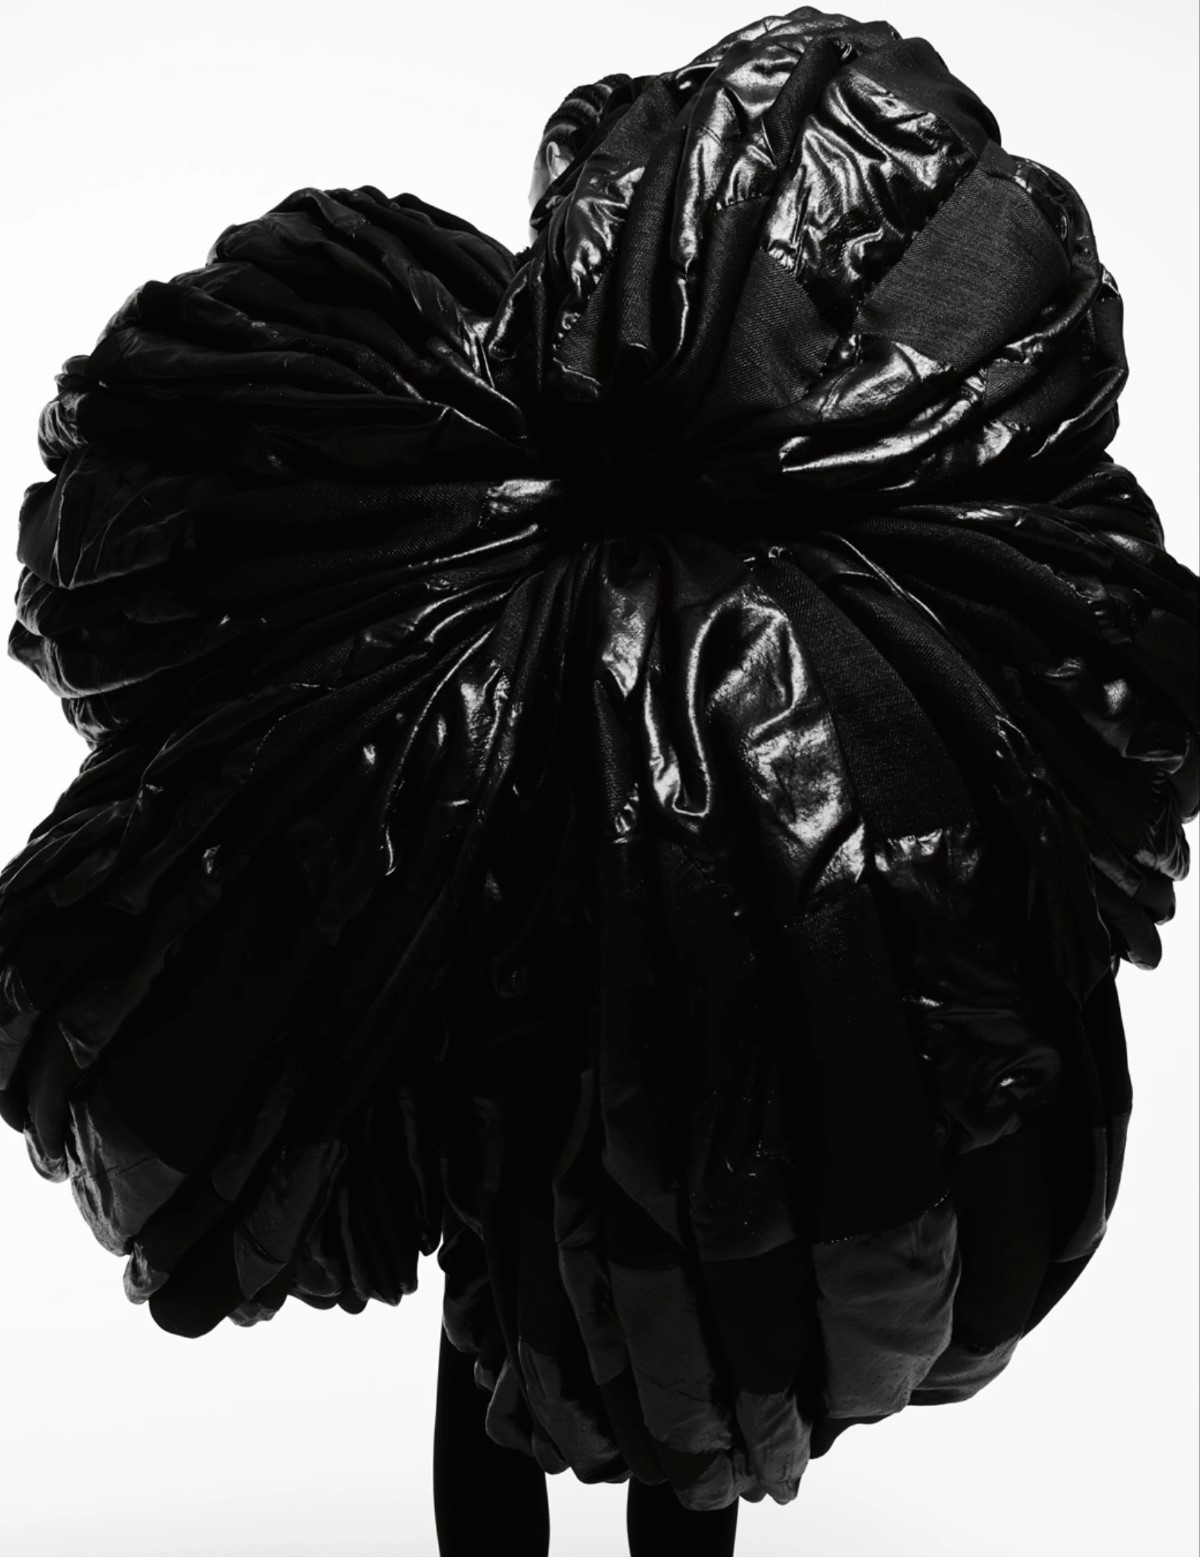 Binx Walton in Comme des Garçons on i-D Magazine Issue 367 by Amy Troost